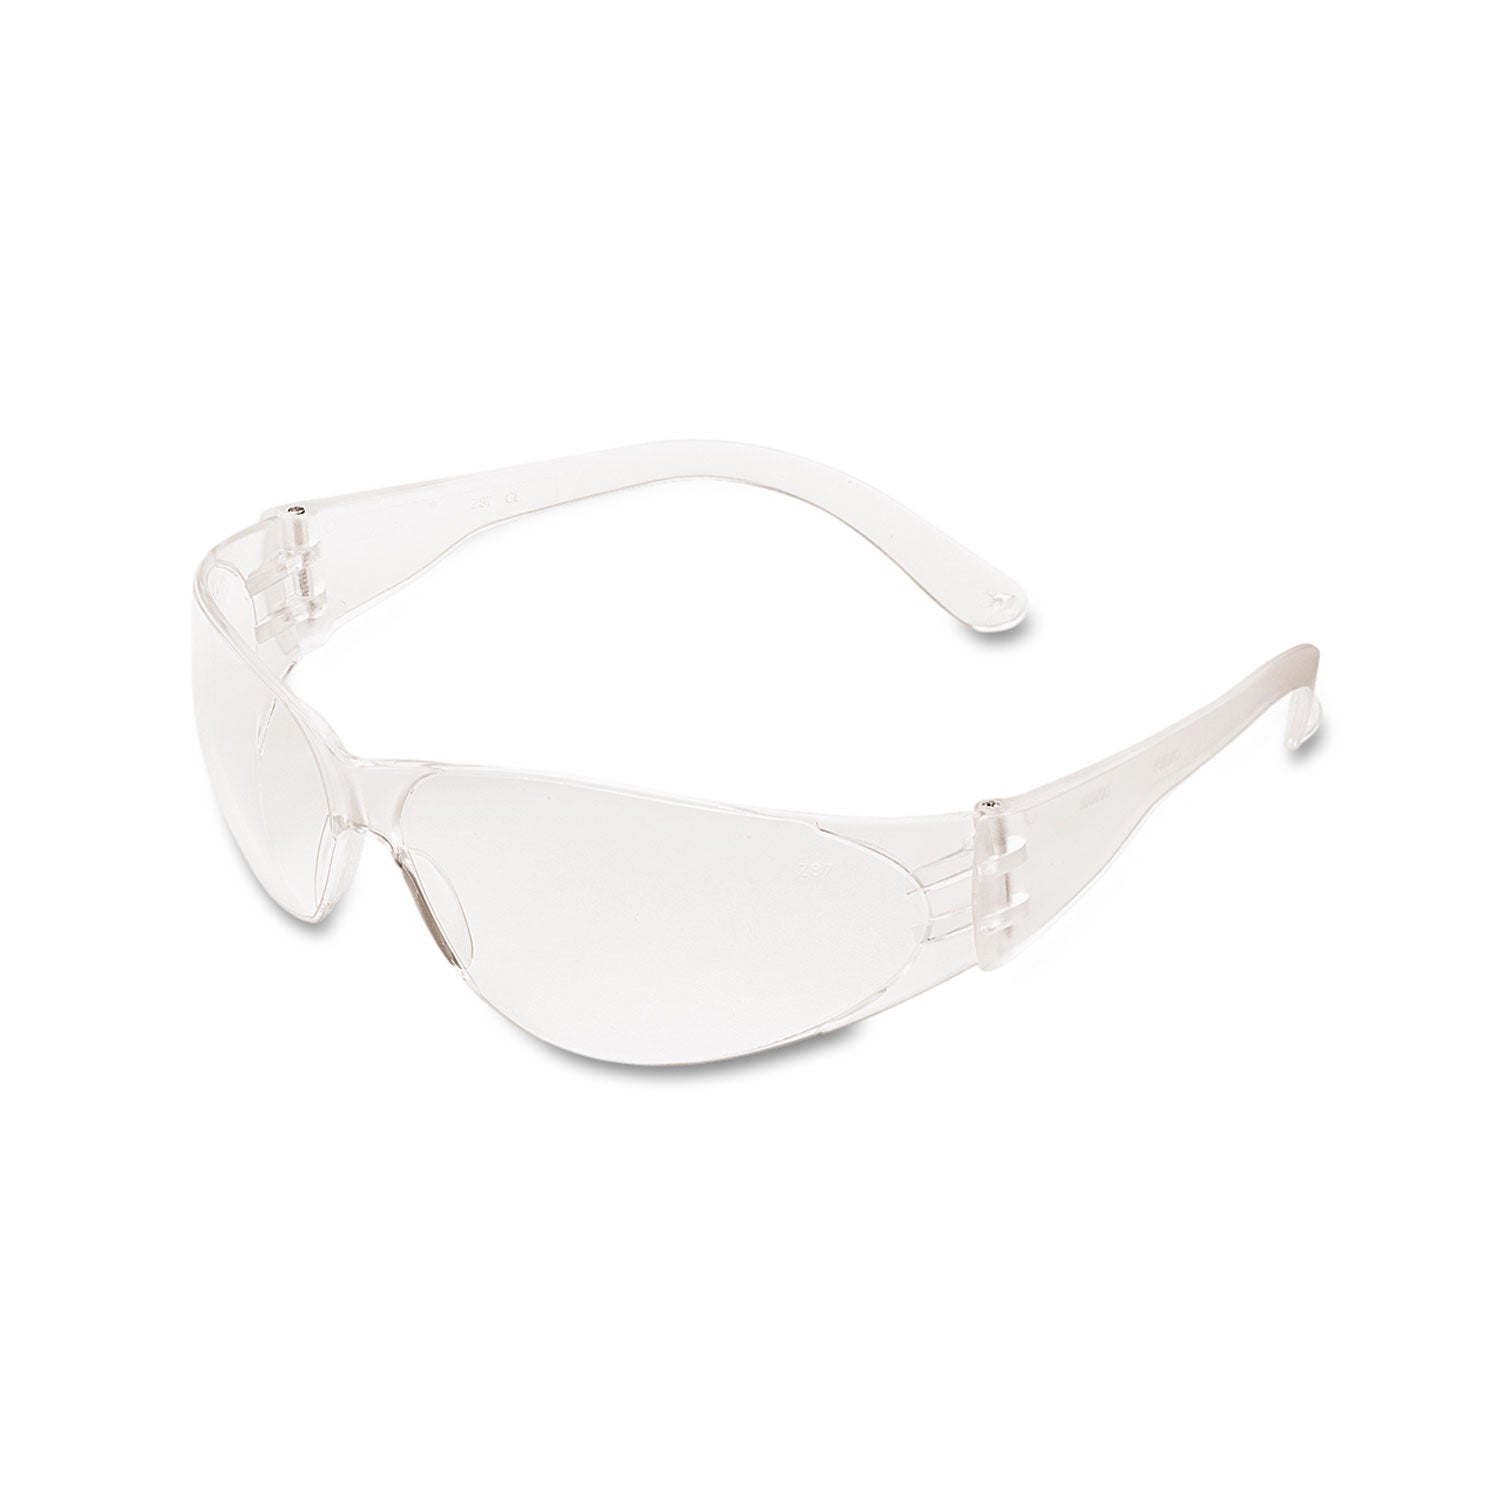 Checklite Scratch-Resistant Safety Glasses, Clear Lens, 12/Box - 